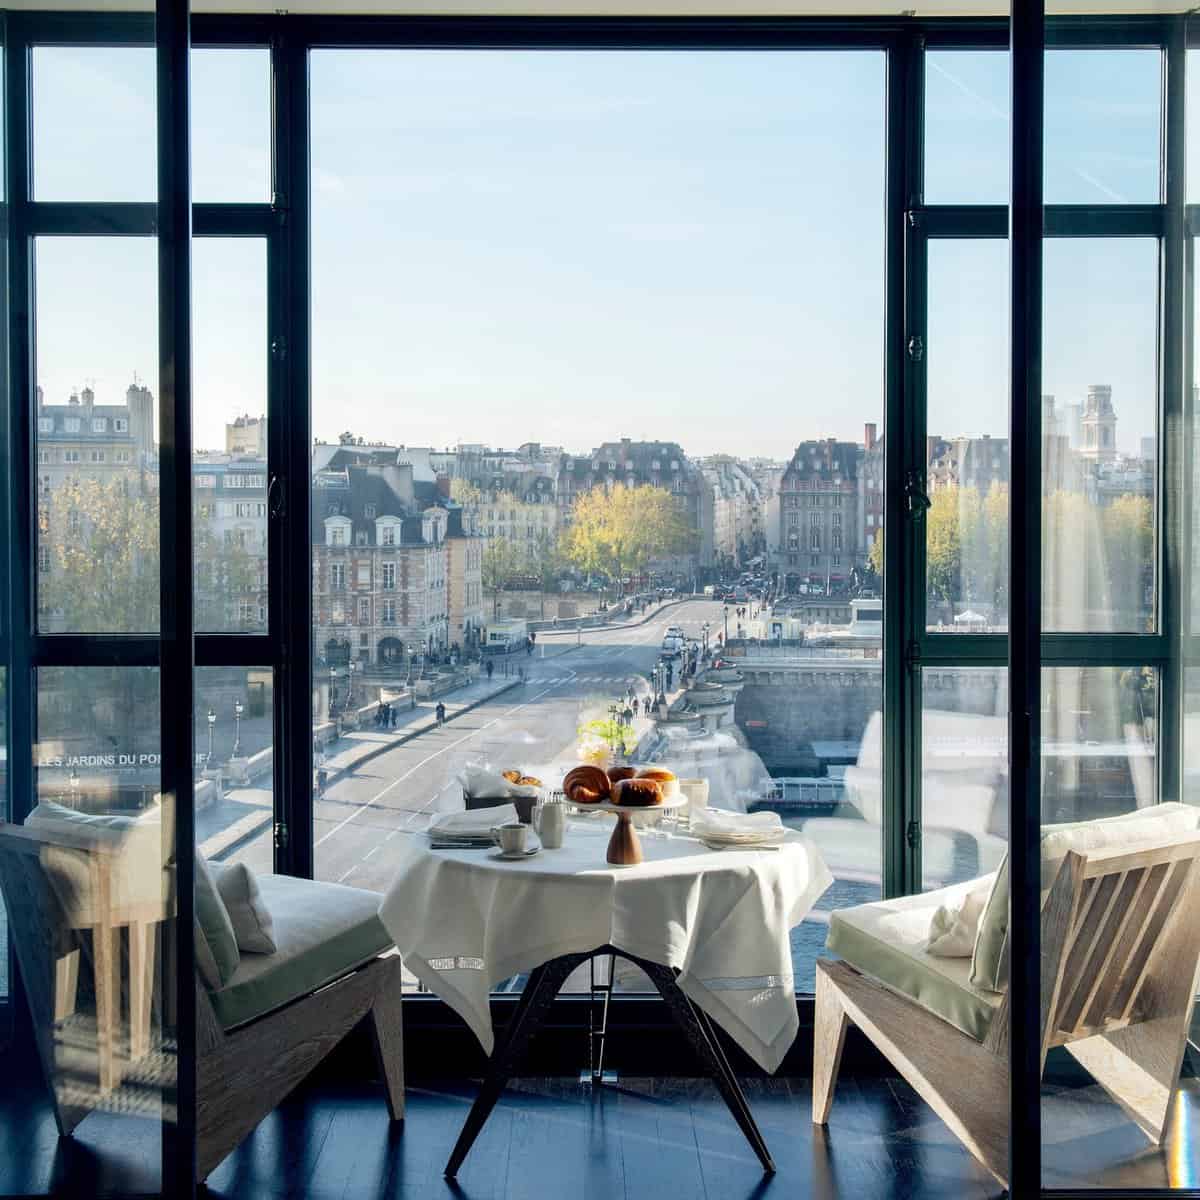 Review: Cheval Blanc Paris - One Mile at a Time